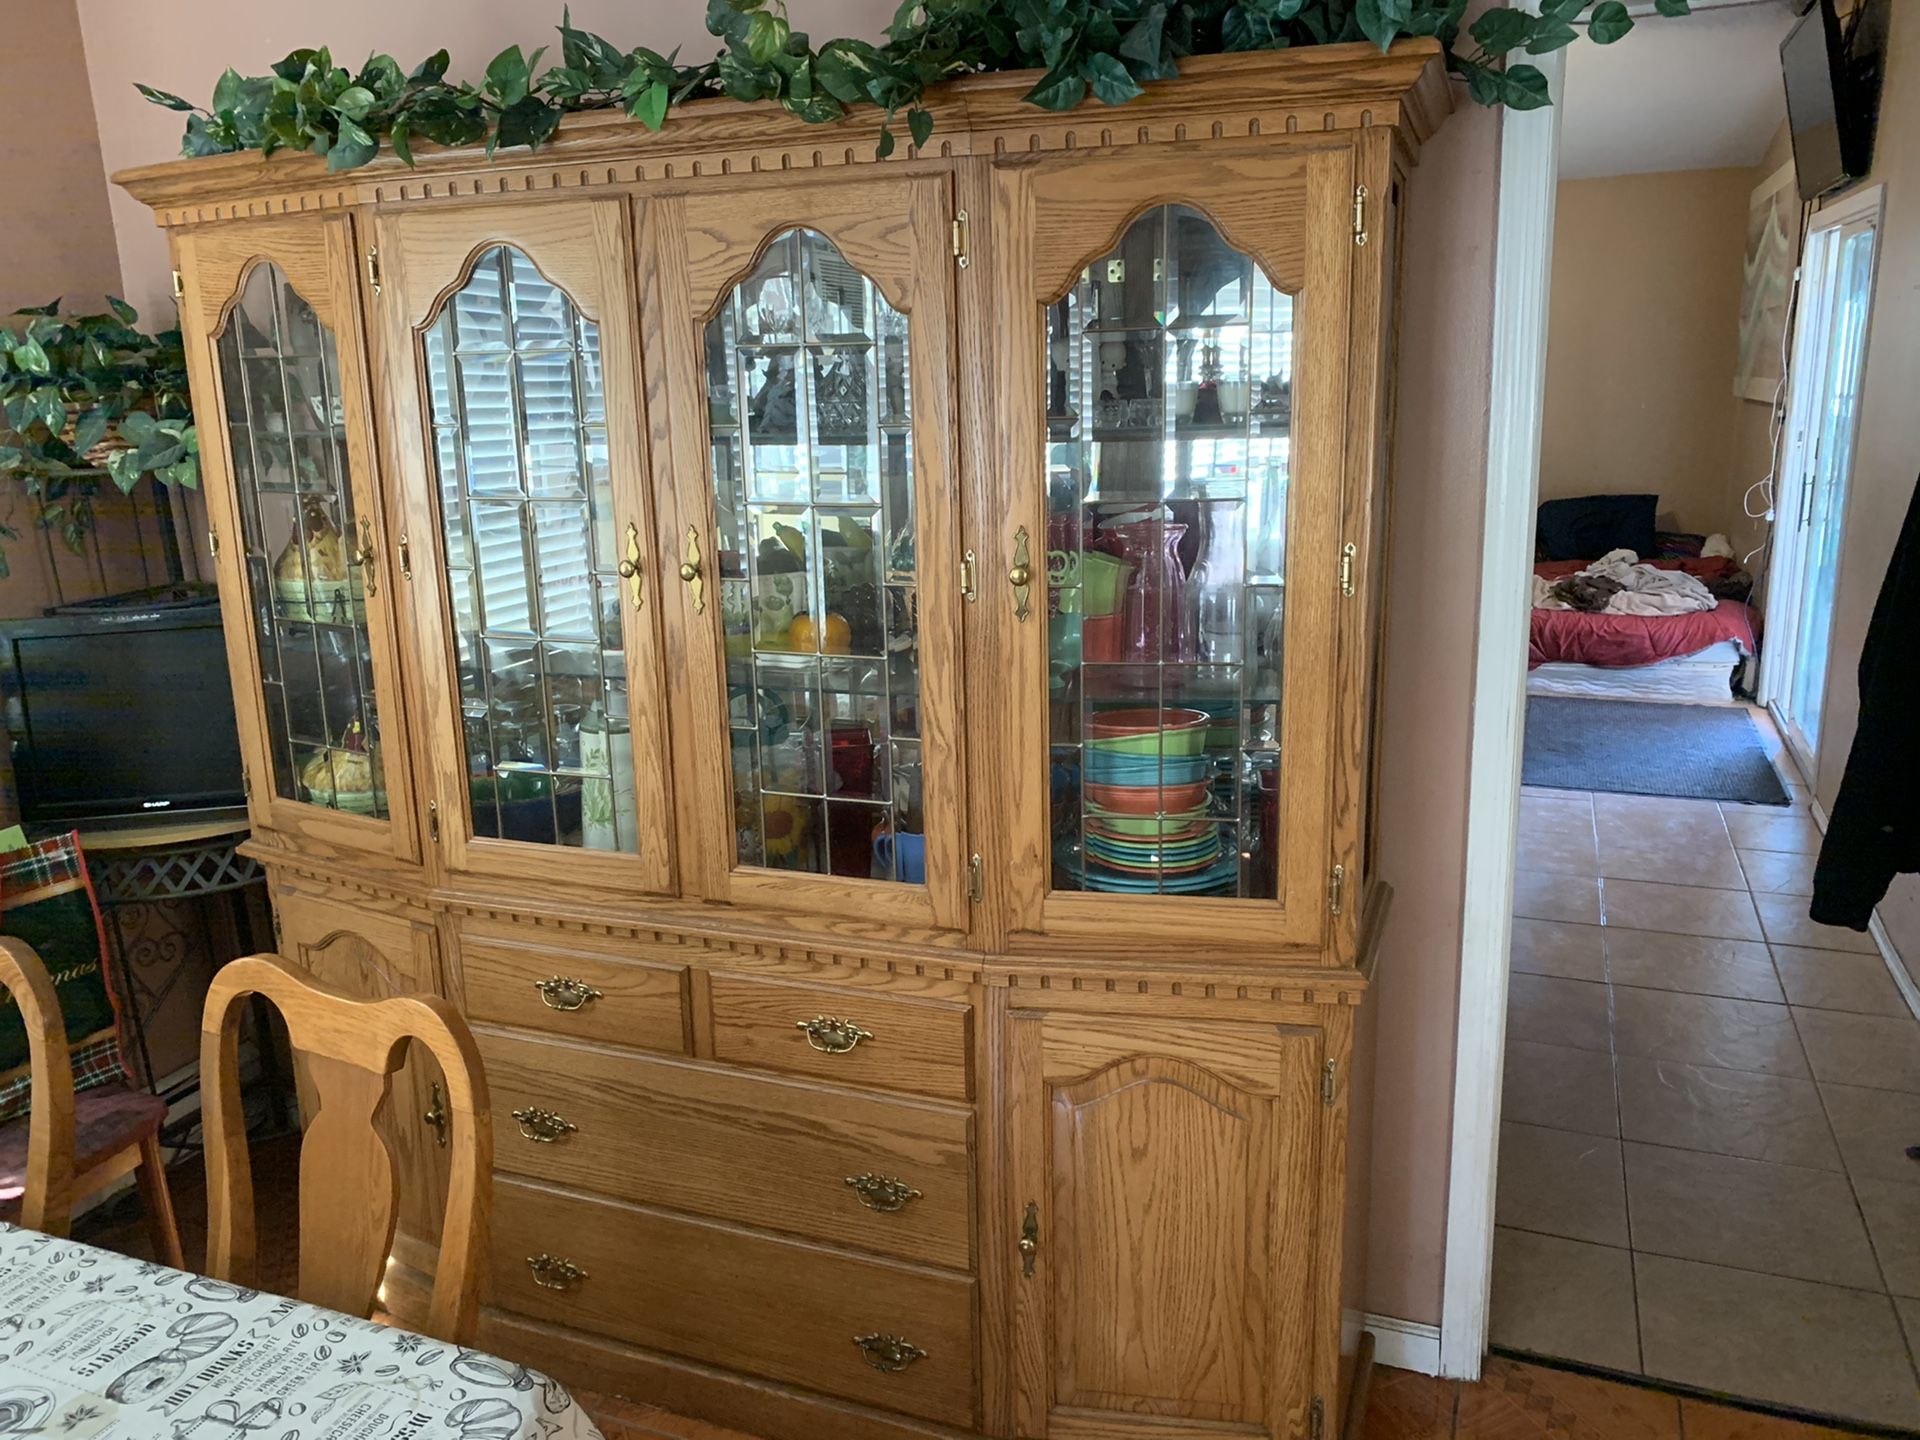 Thomasville style dining room set to hutches table and chairs